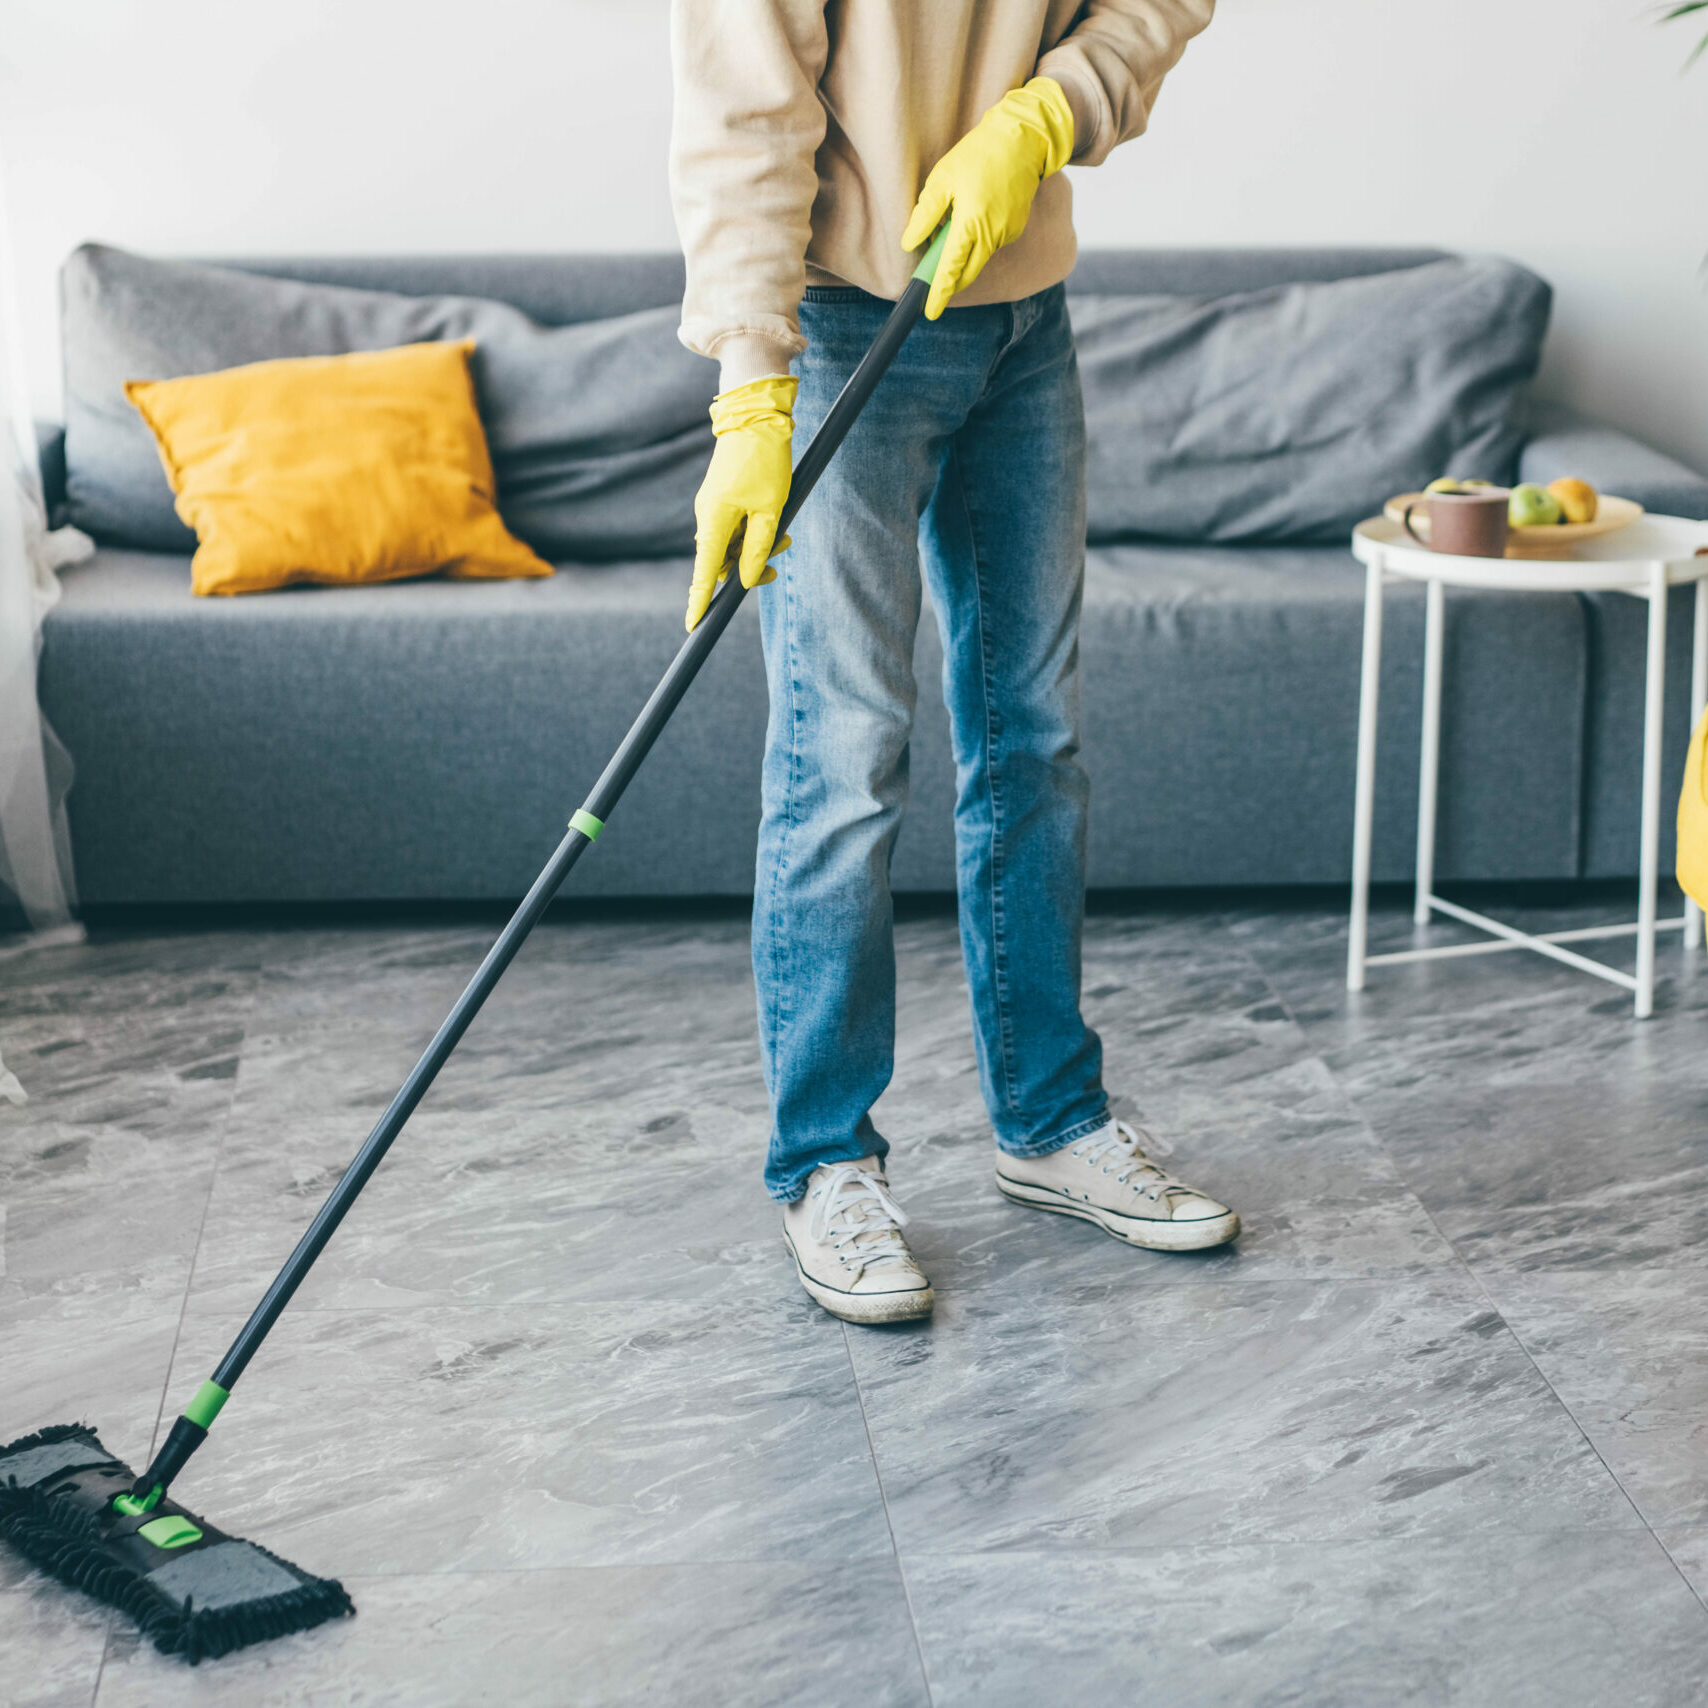 Man washes the floors with a mop in room.